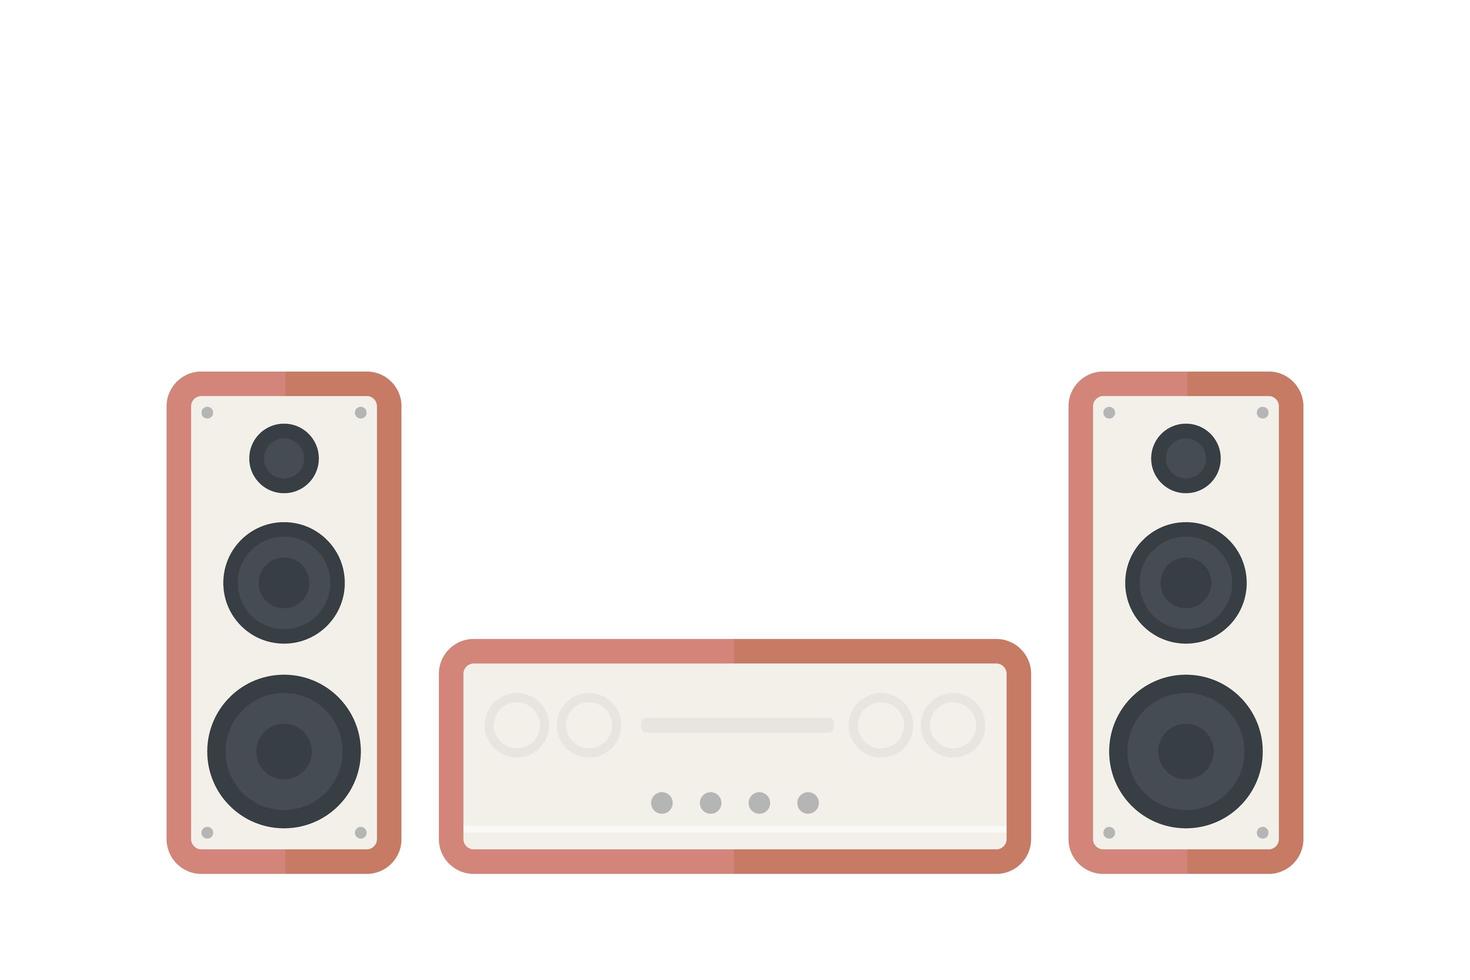 audio system on white, in retro style vector